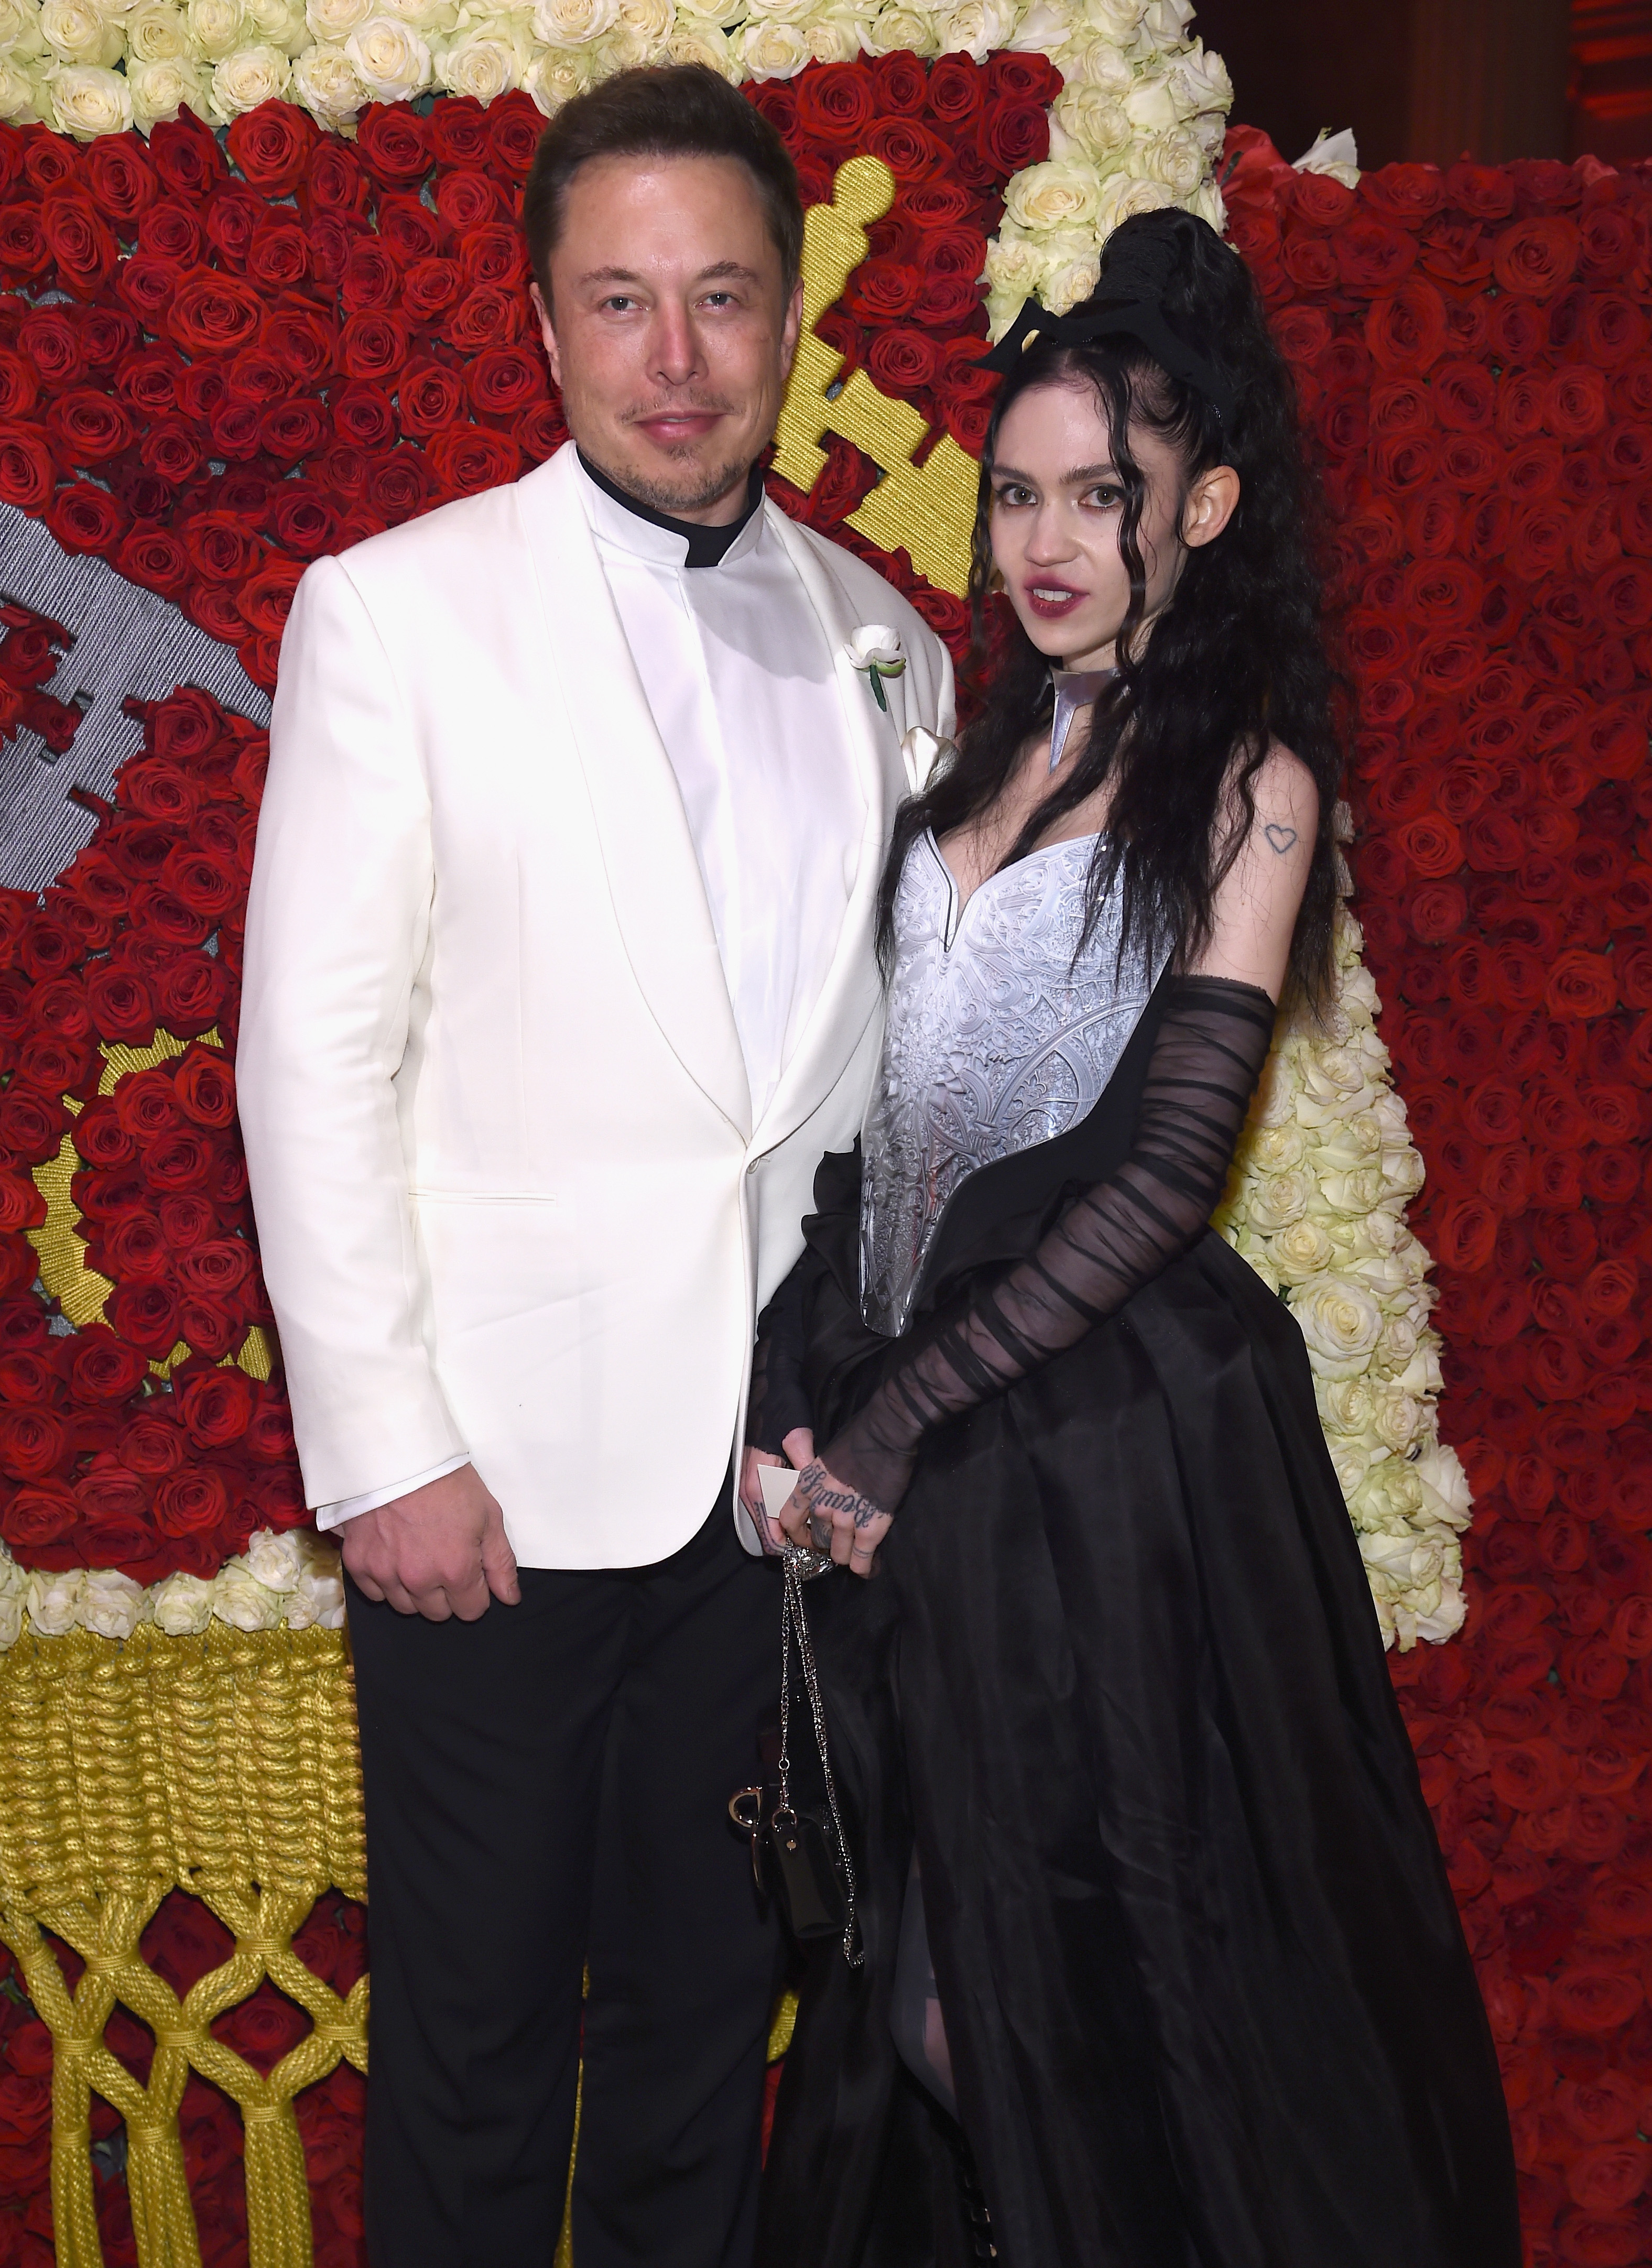 Elon in a white suit and Grimes in a black dress